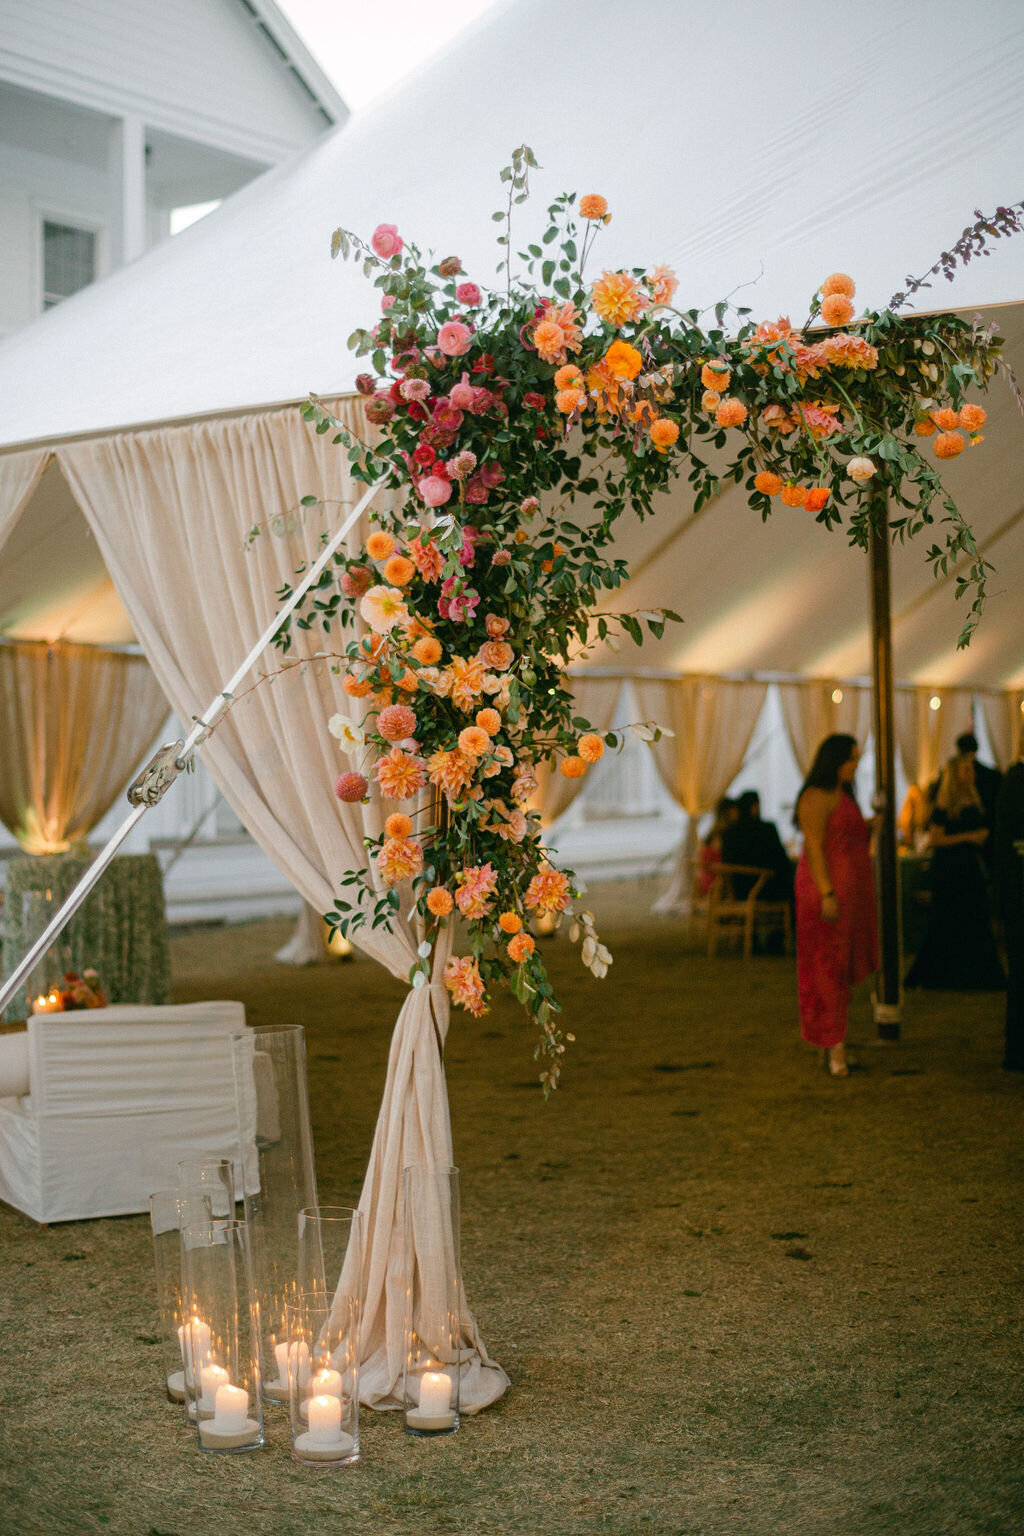 Florals and candles at tented Wedding reception at Lyceum Lawn